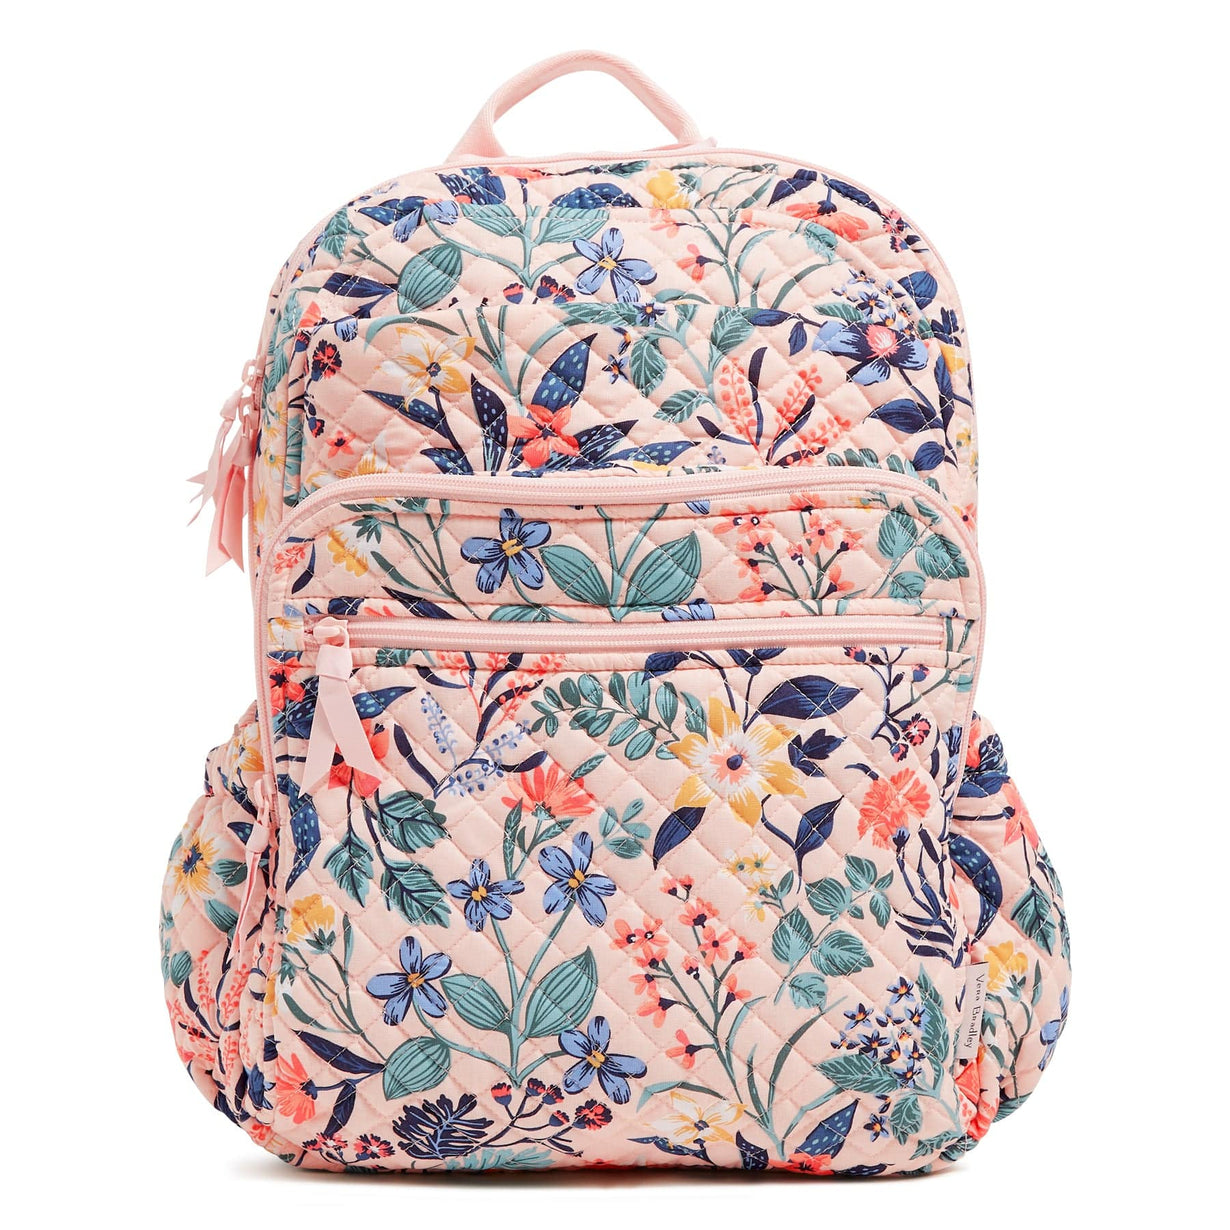 Pink extra large quilted backpack with floral pattern